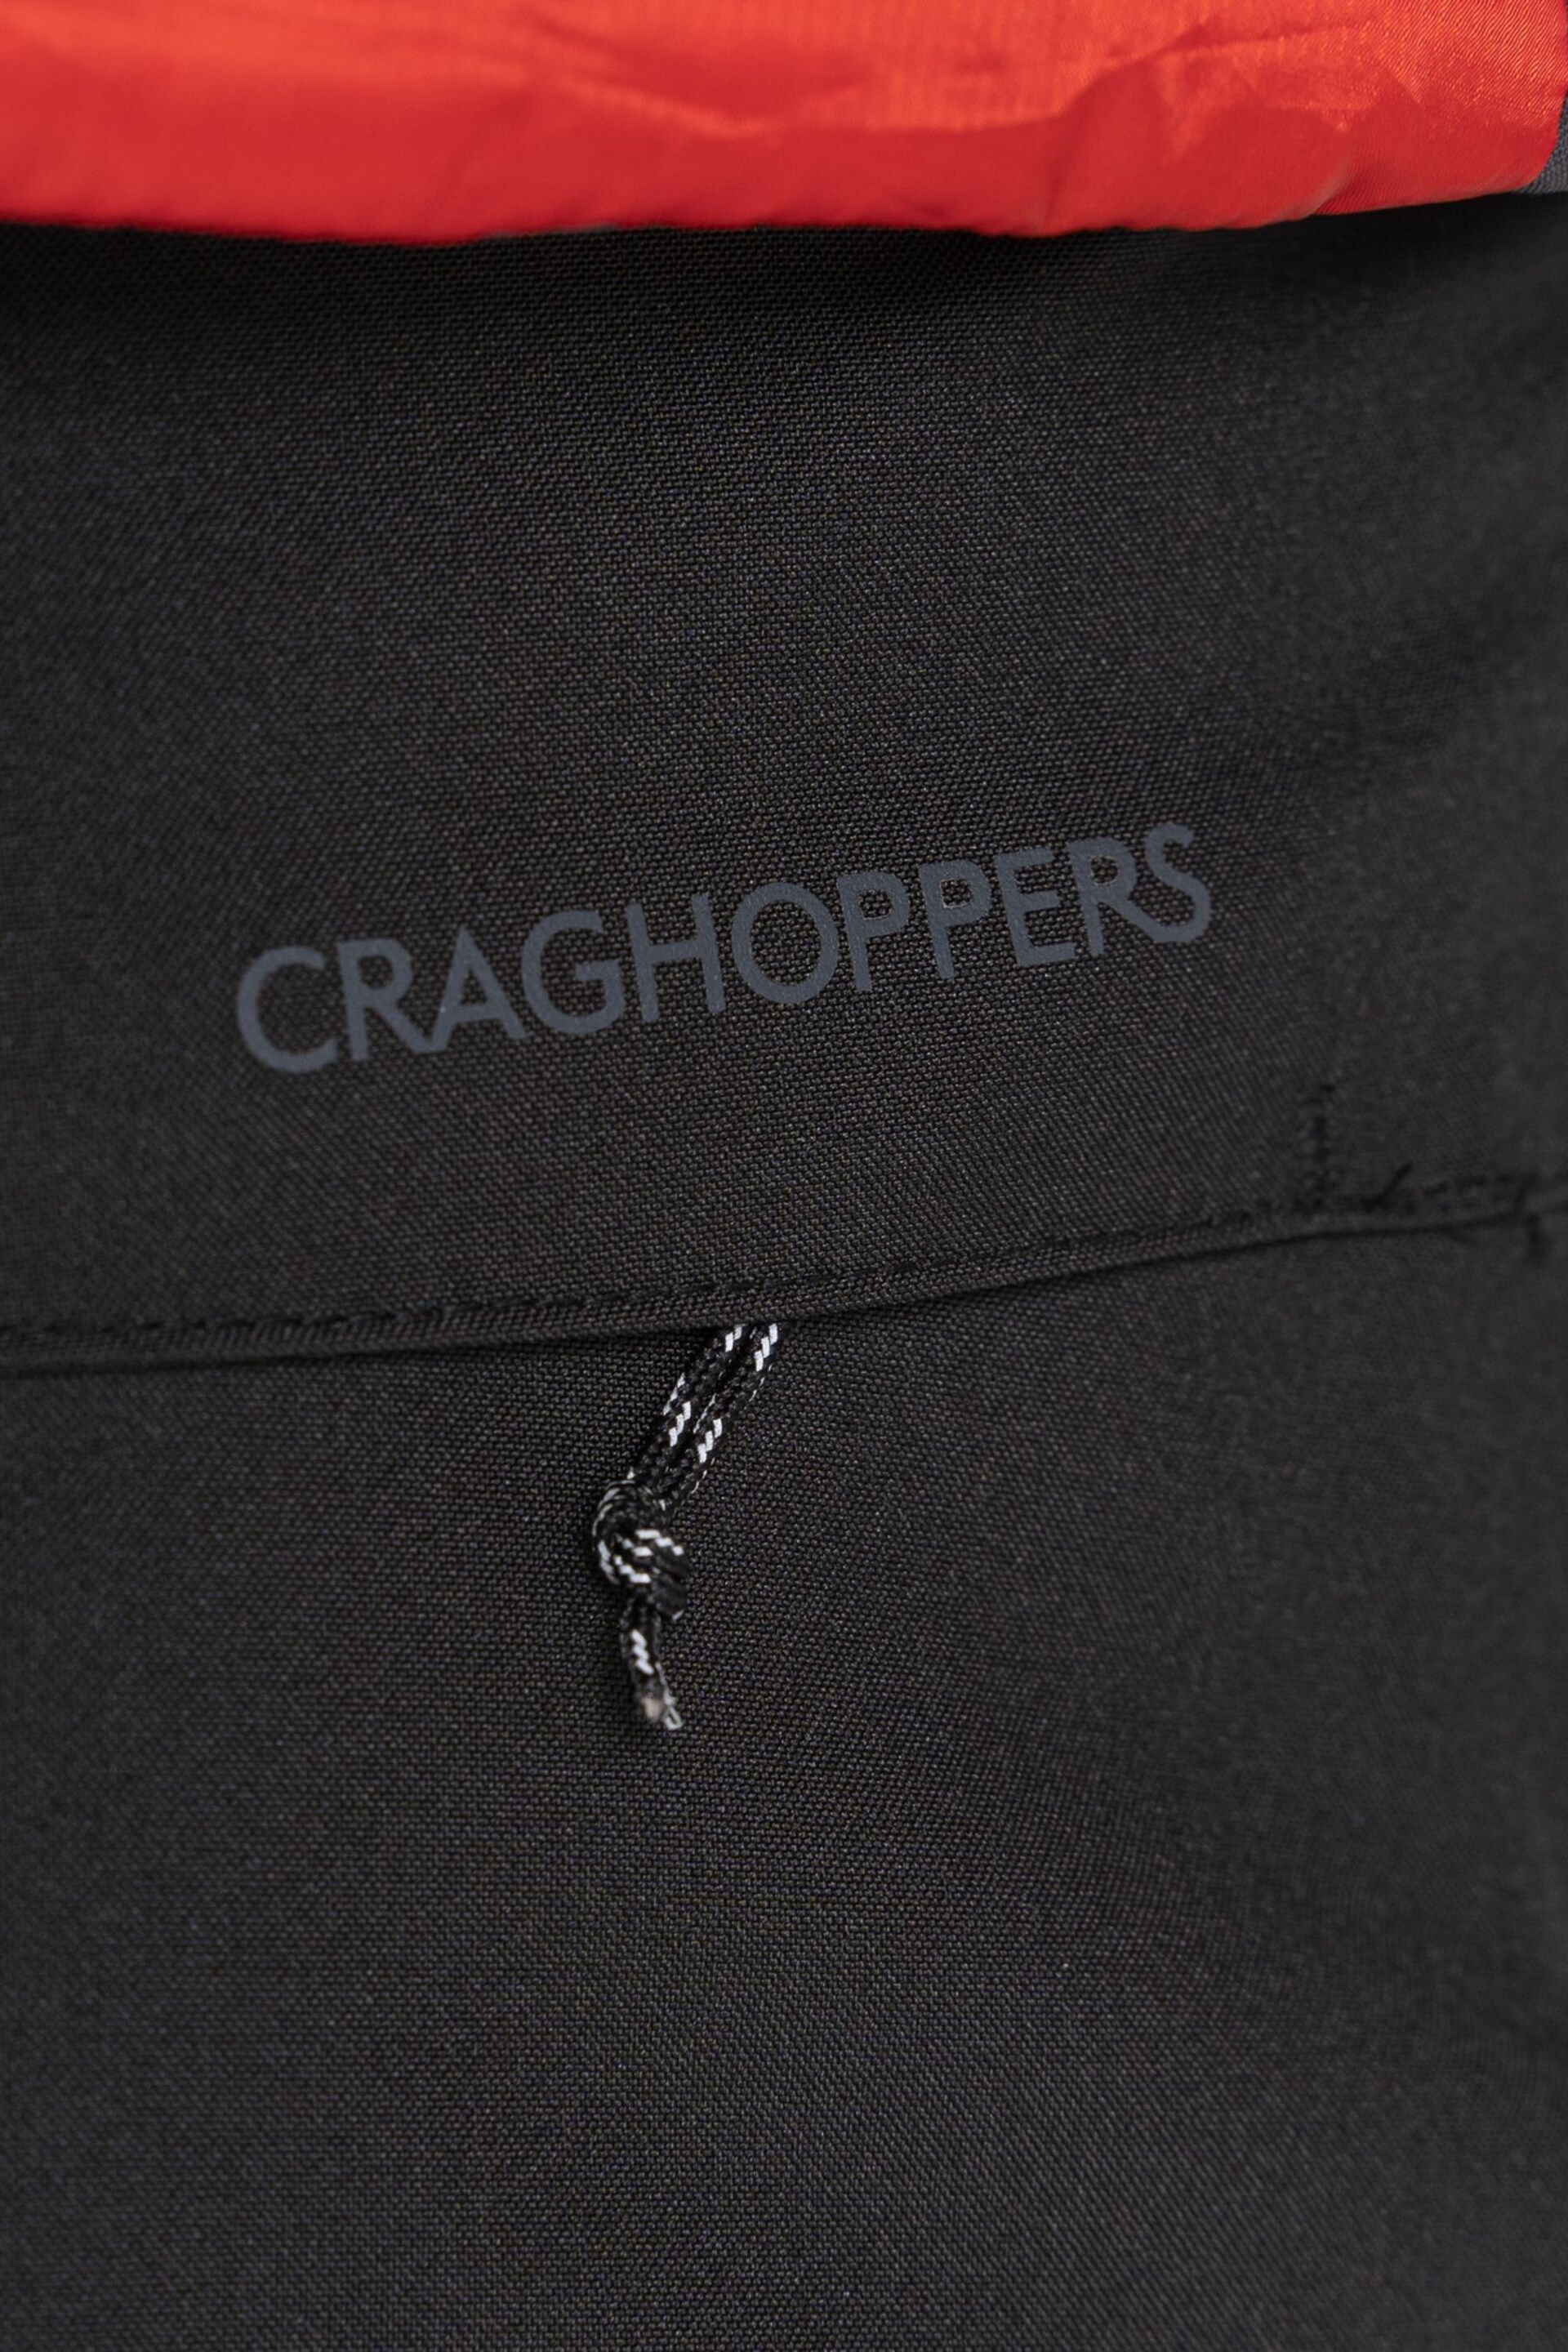 Craghoppers Steall Thermo Black Trousers - Image 4 of 7